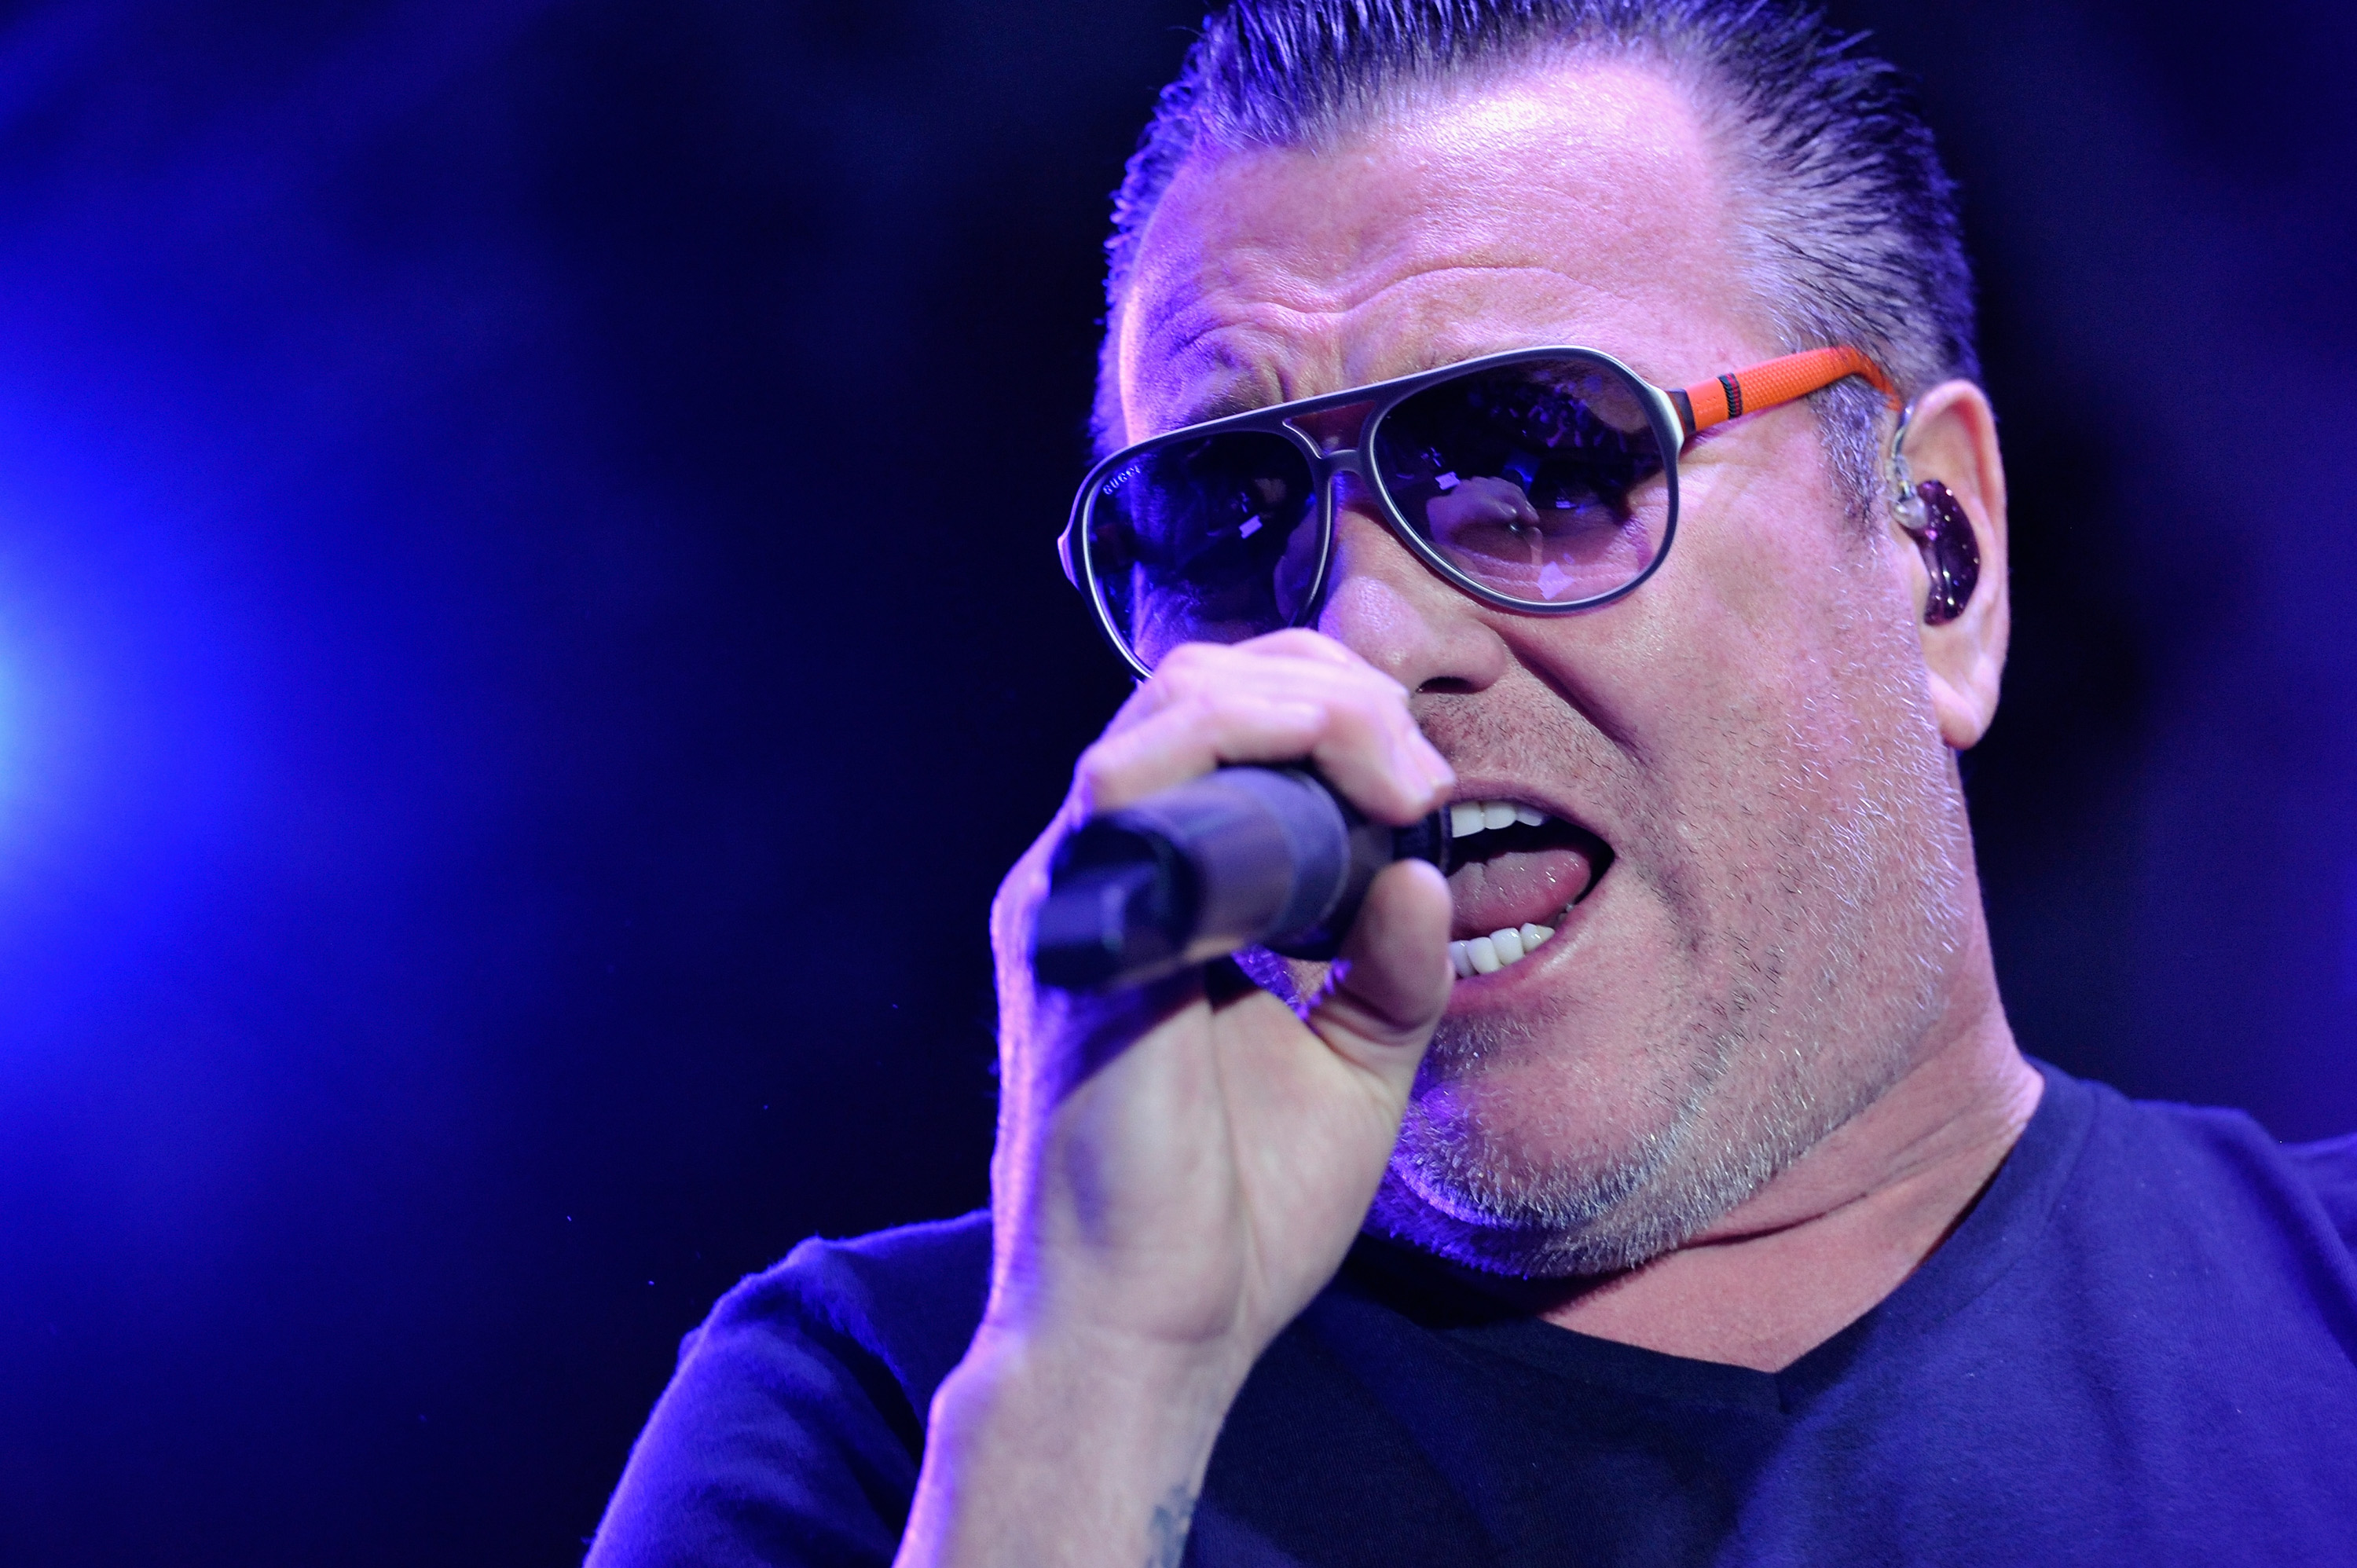 Smash Mouth Receives Hate Mail After Recent Concert Linked To 100